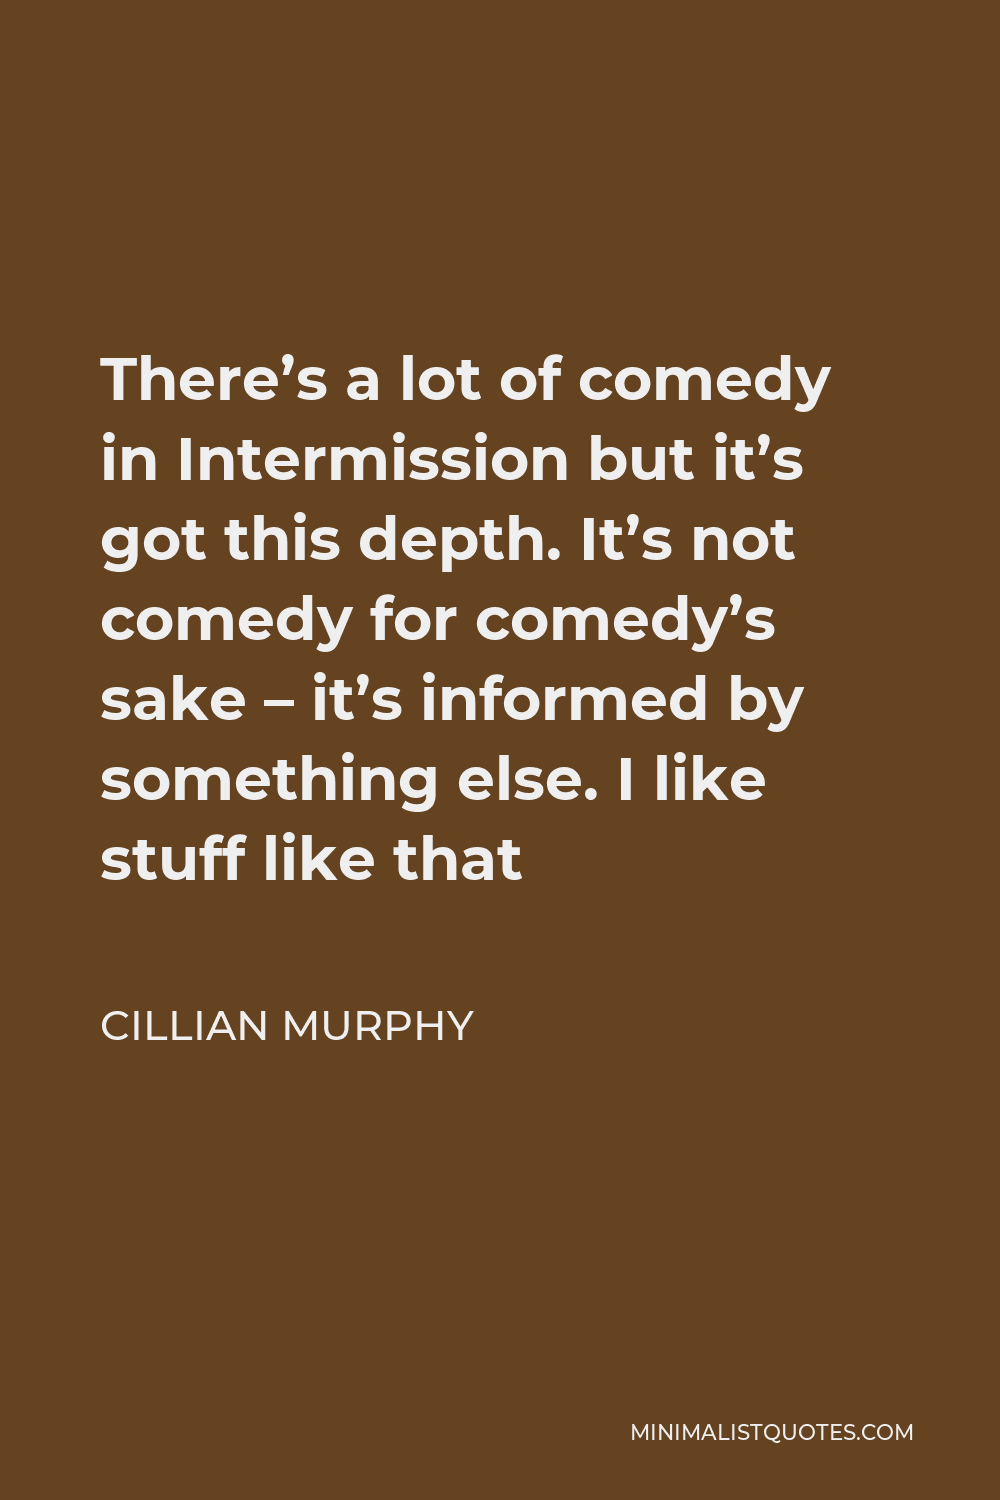 Cillian Murphy Quote - There’s a lot of comedy in Intermission but it’s got this depth. It’s not comedy for comedy’s sake – it’s informed by something else. I like stuff like that